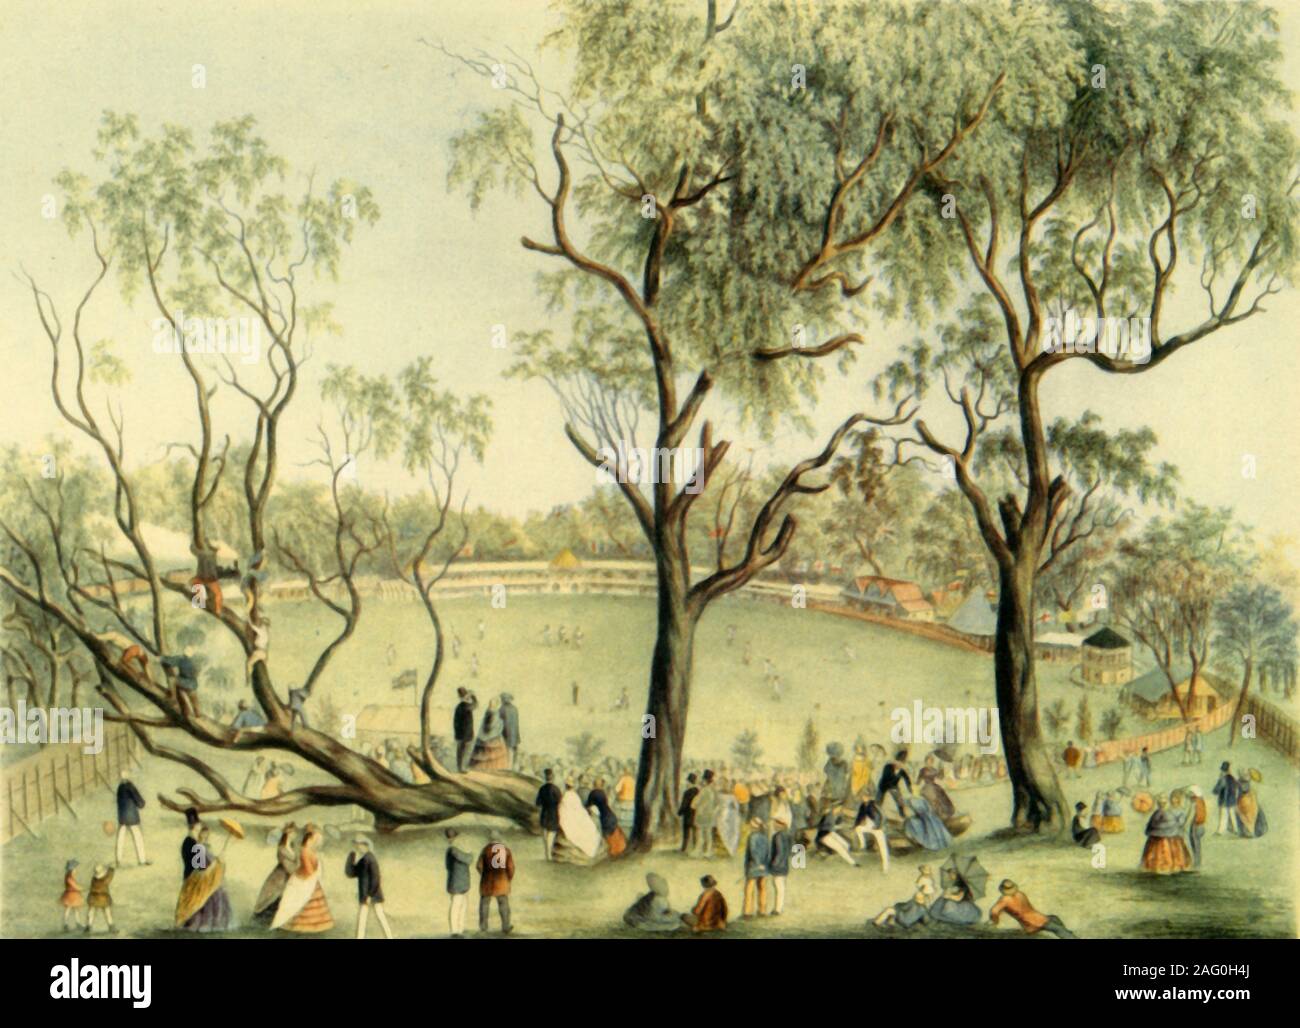 'An XI of England v. XXII of Victoria at Melbourne, 1864', (1947). Spectators climb eucalyptus trees to watch an international cricket match between the All England Eleven and Twenty-Two of Victoria at Melbourne, Australia. The first tour to Australia by an England cricket team was made in 1862. From &quot;English Cricket&quot;, by Neville Cardus. [Collins, London, 1947] Stock Photo